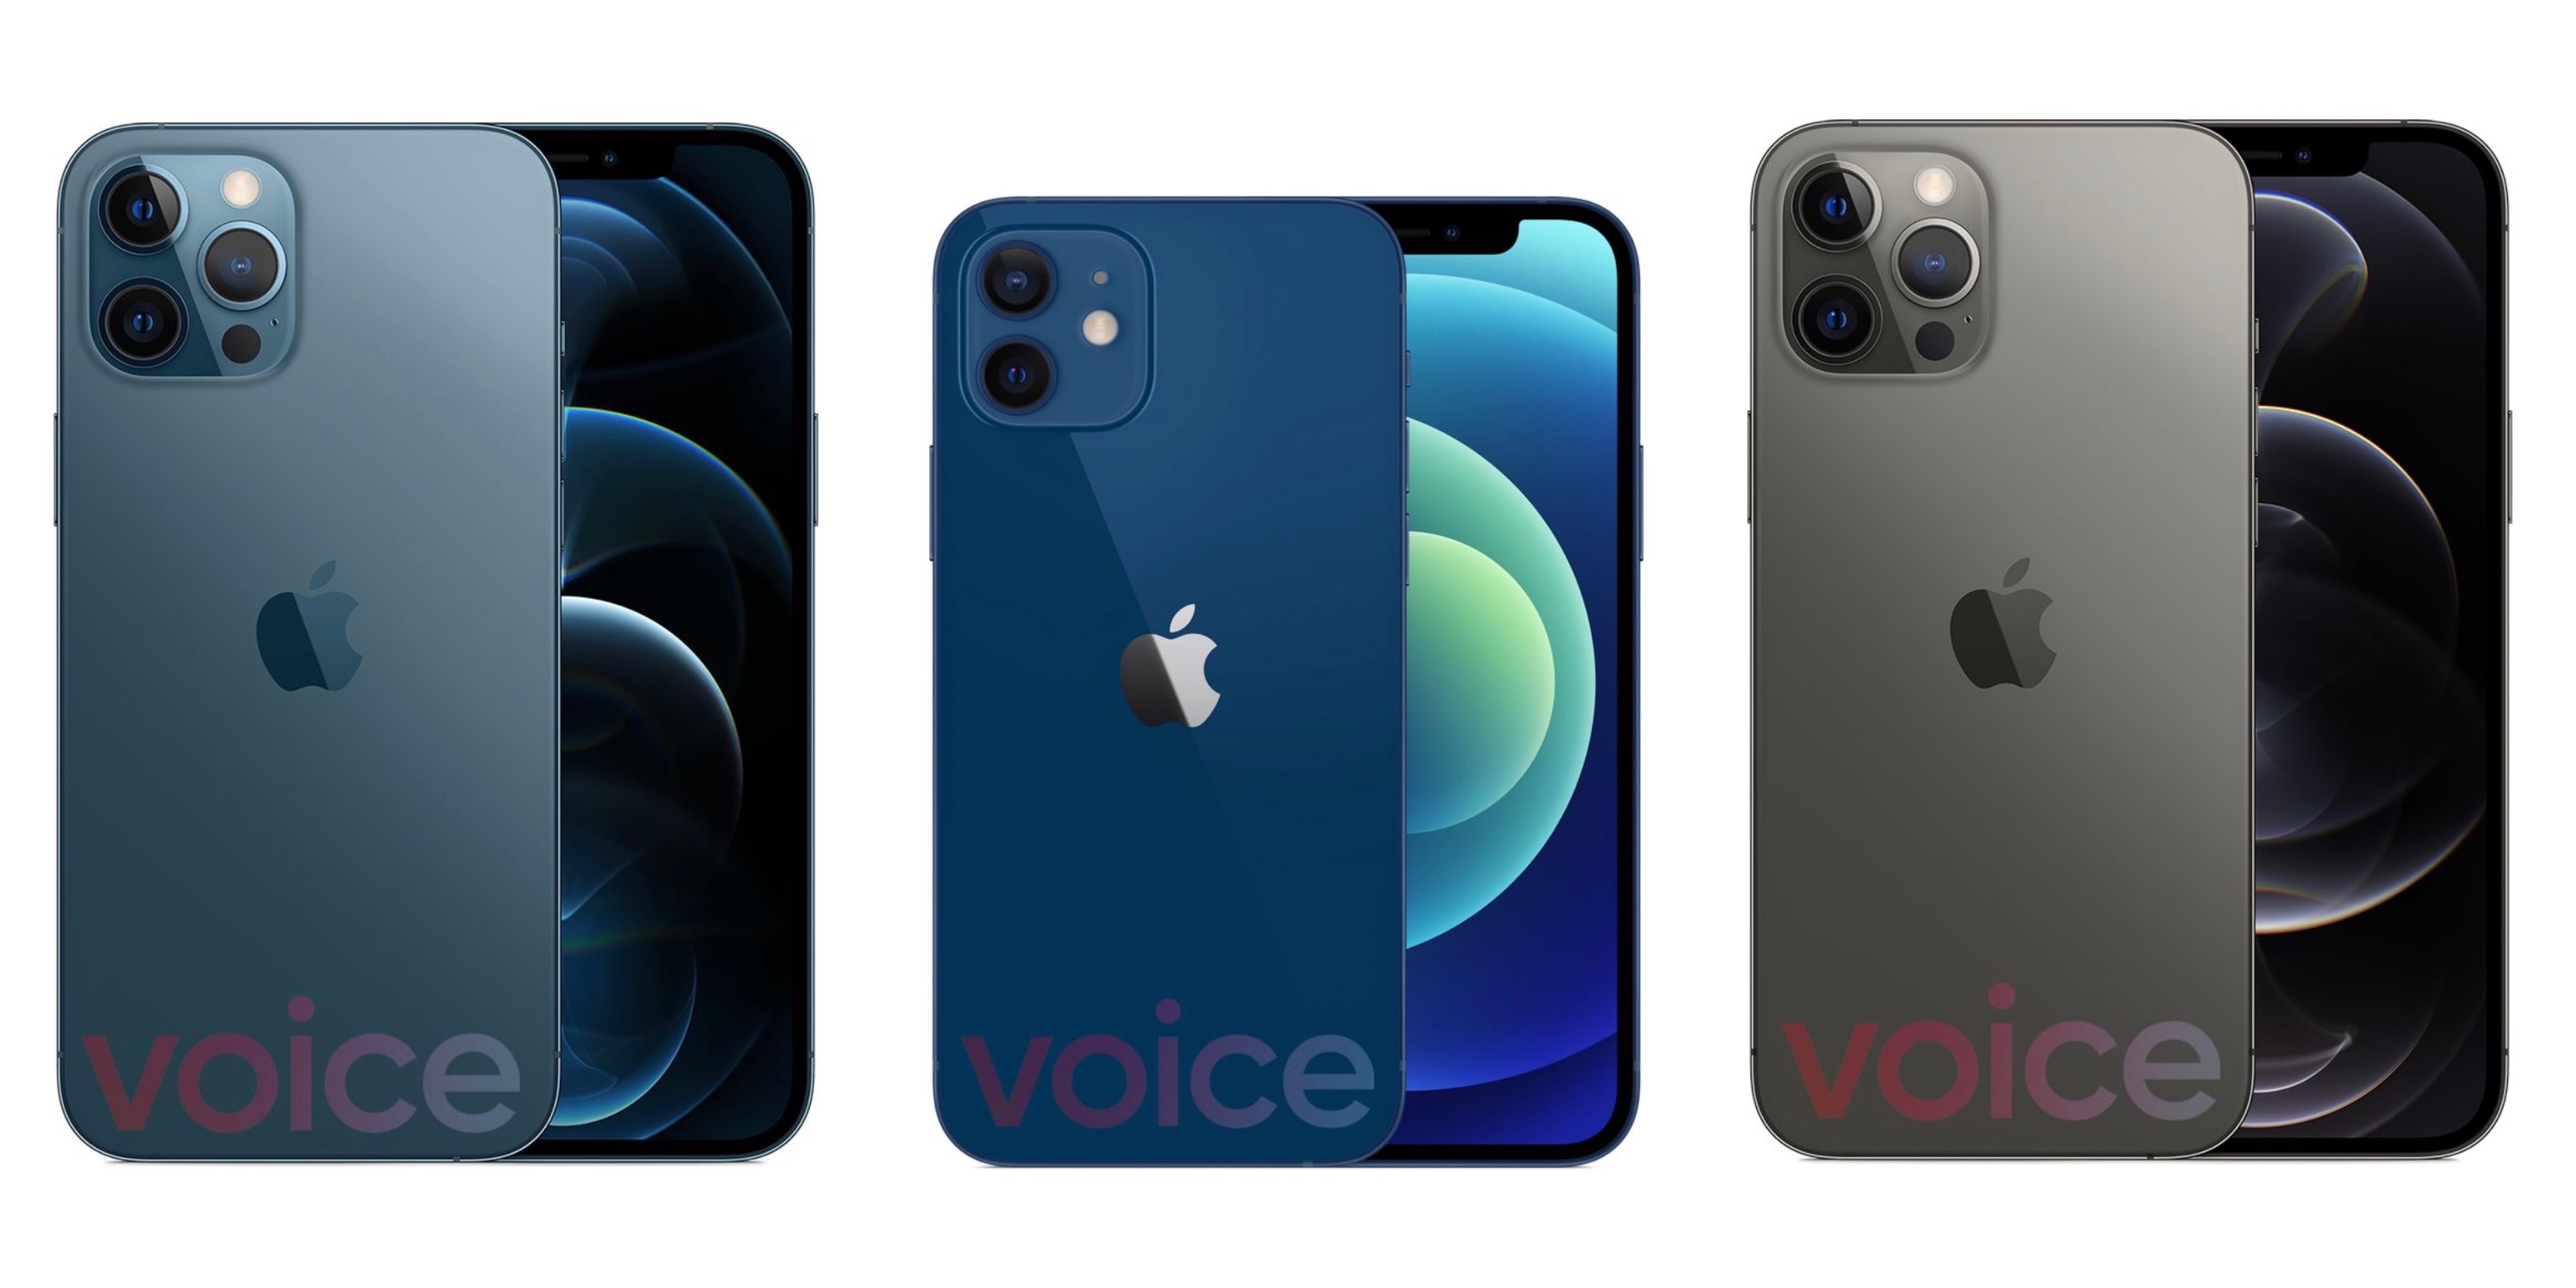 Iphone 12 Lineup Leaks Entirely Before Event Showing New Colors Flat Sides Much More 9to5mac